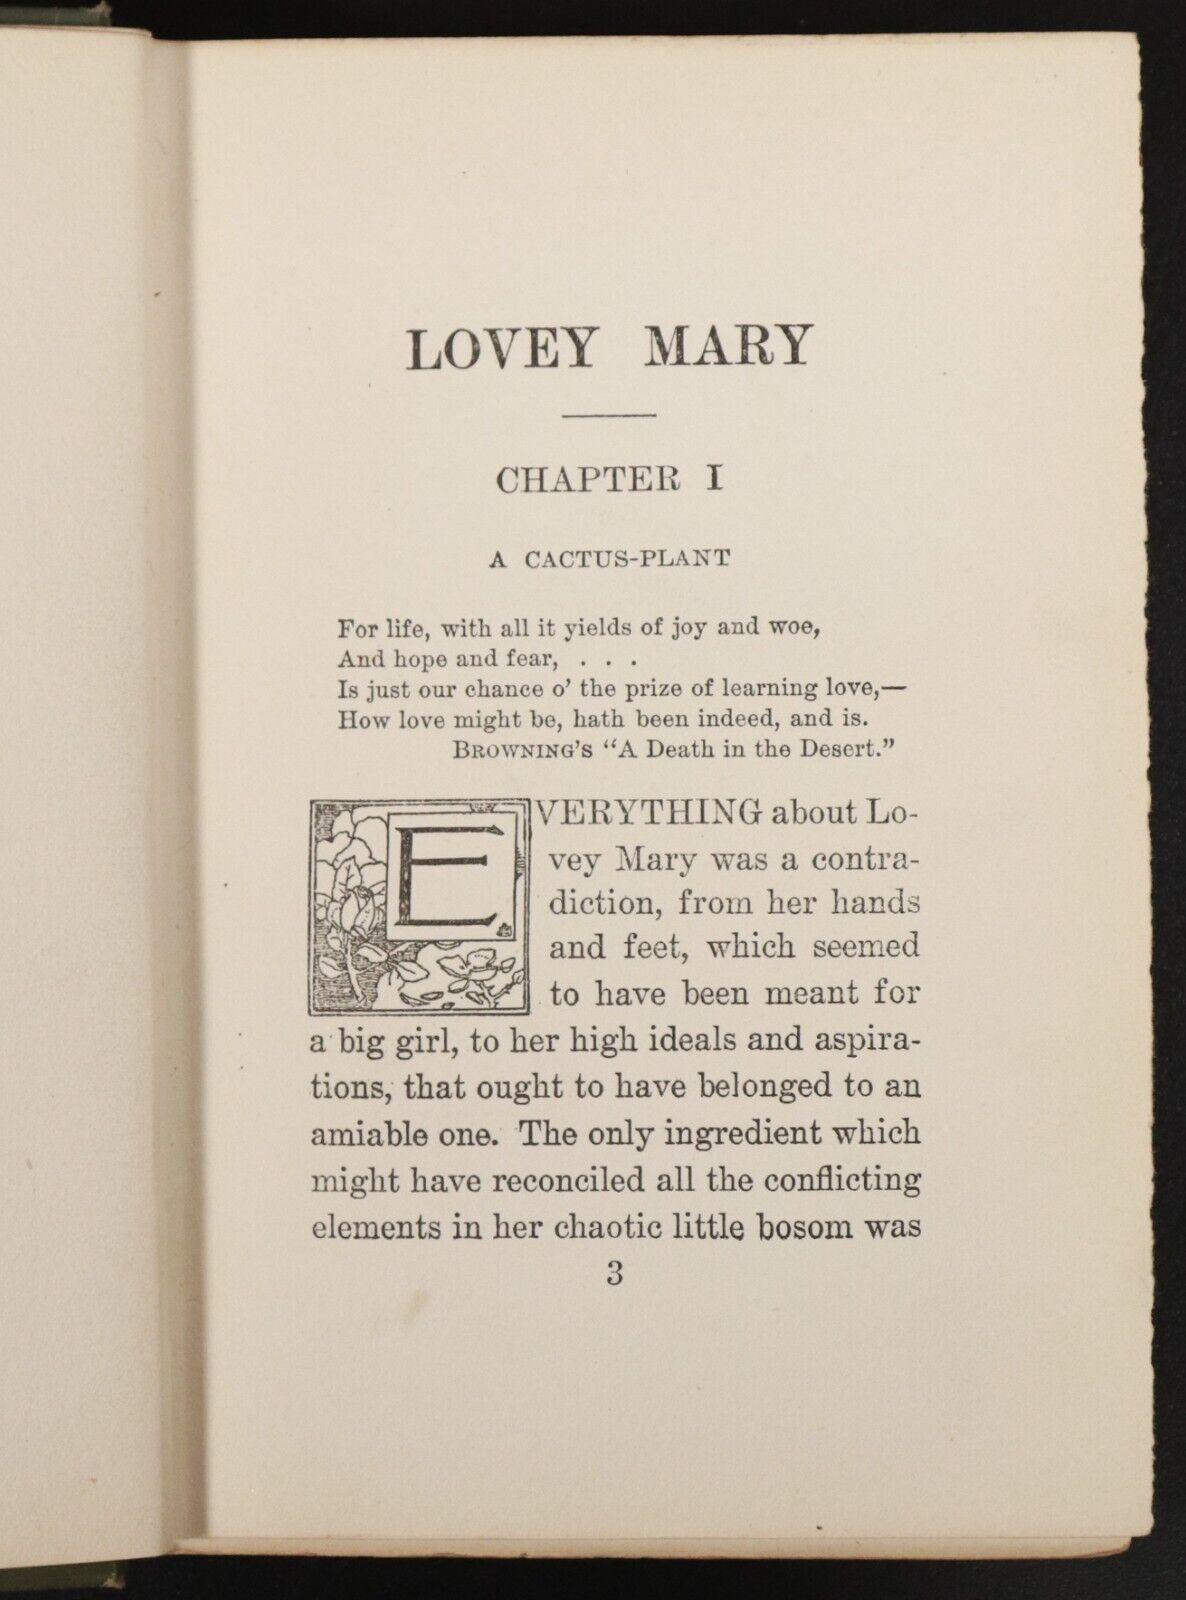 1903 Lovey Mary by Alice Hegan Rice Antique American Fiction Book Illustrated